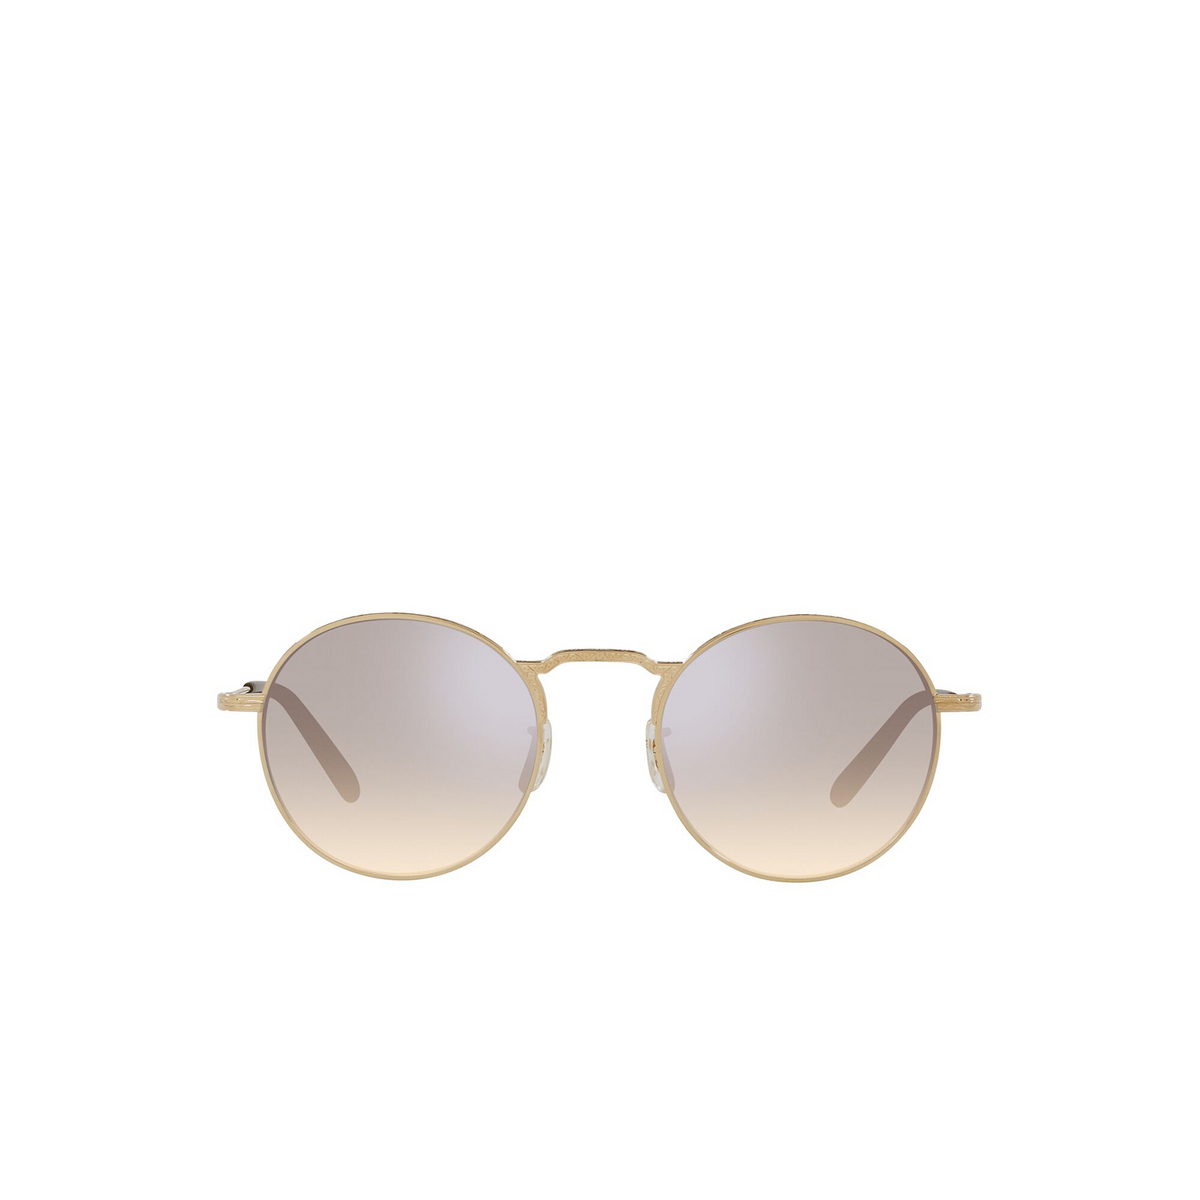 Oliver Peoples® Round Sunglasses: Weslie Sun OV1282ST color Gold 529232 - front view.